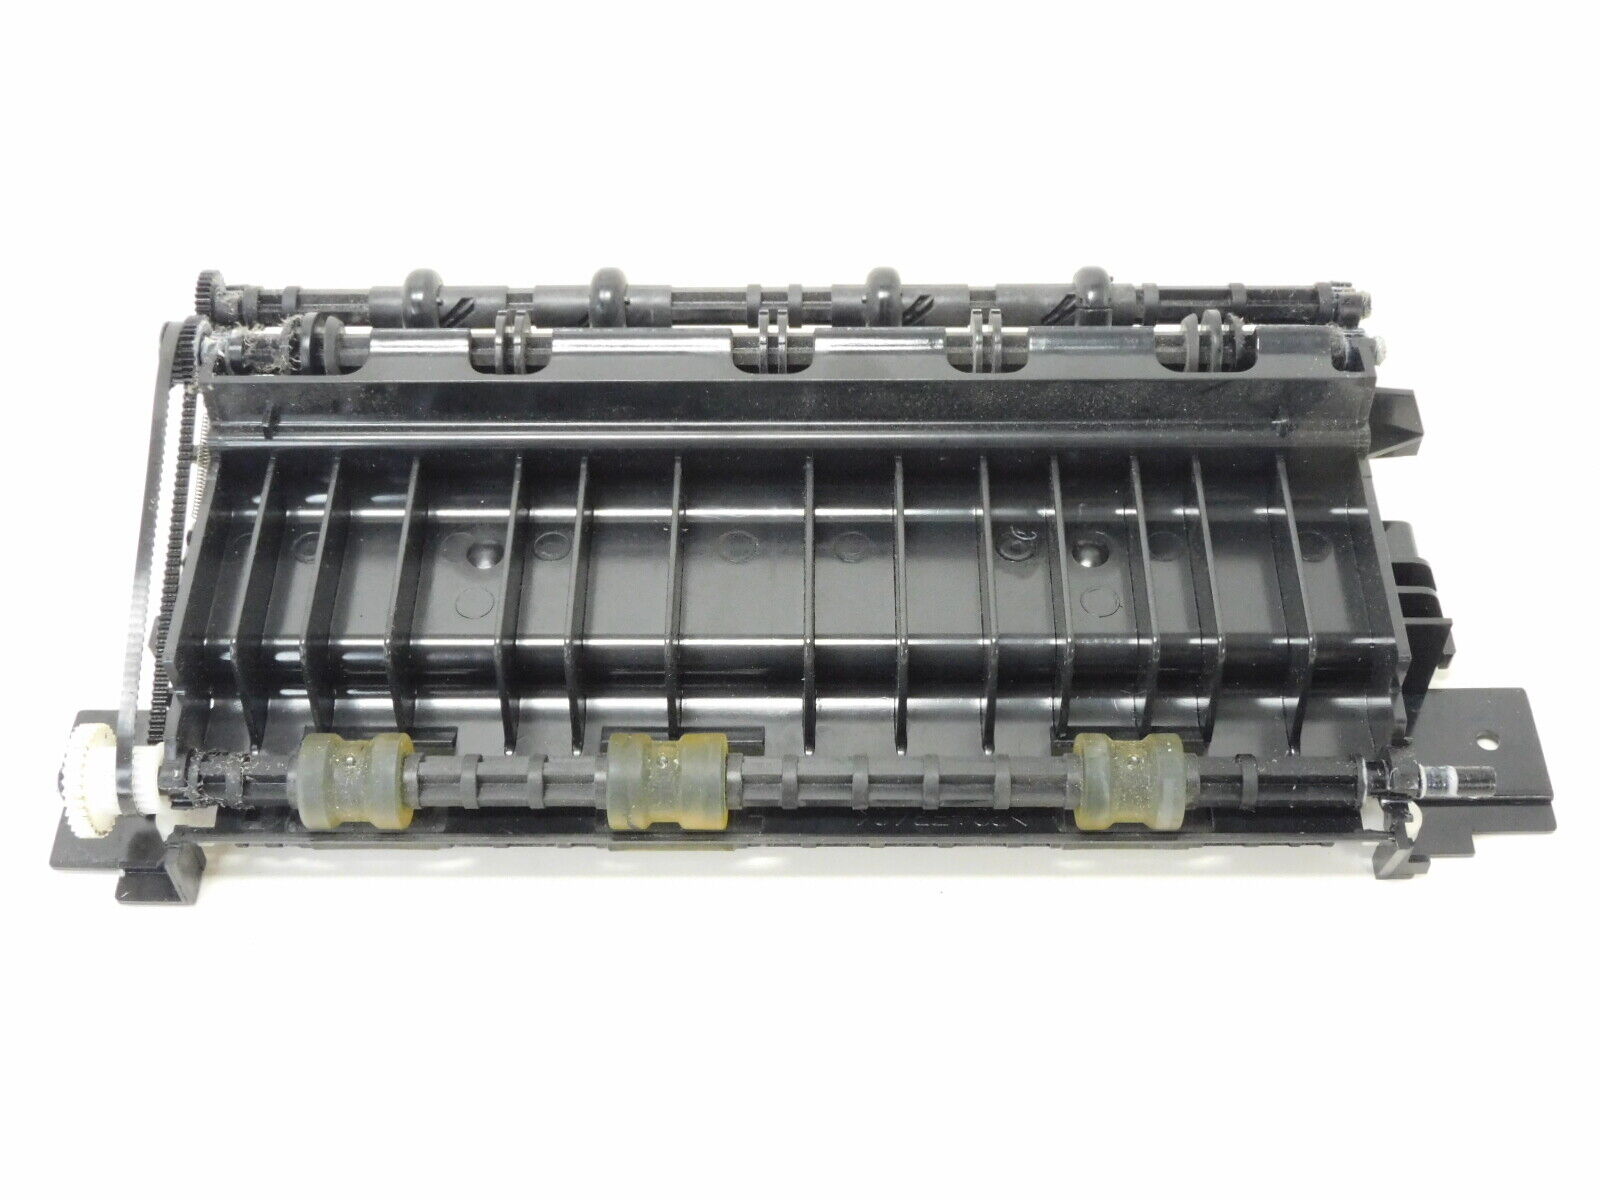 Genuine OEM Lexmark Laser Printer Fuser Redrive Assembly T654dn Replacement Part